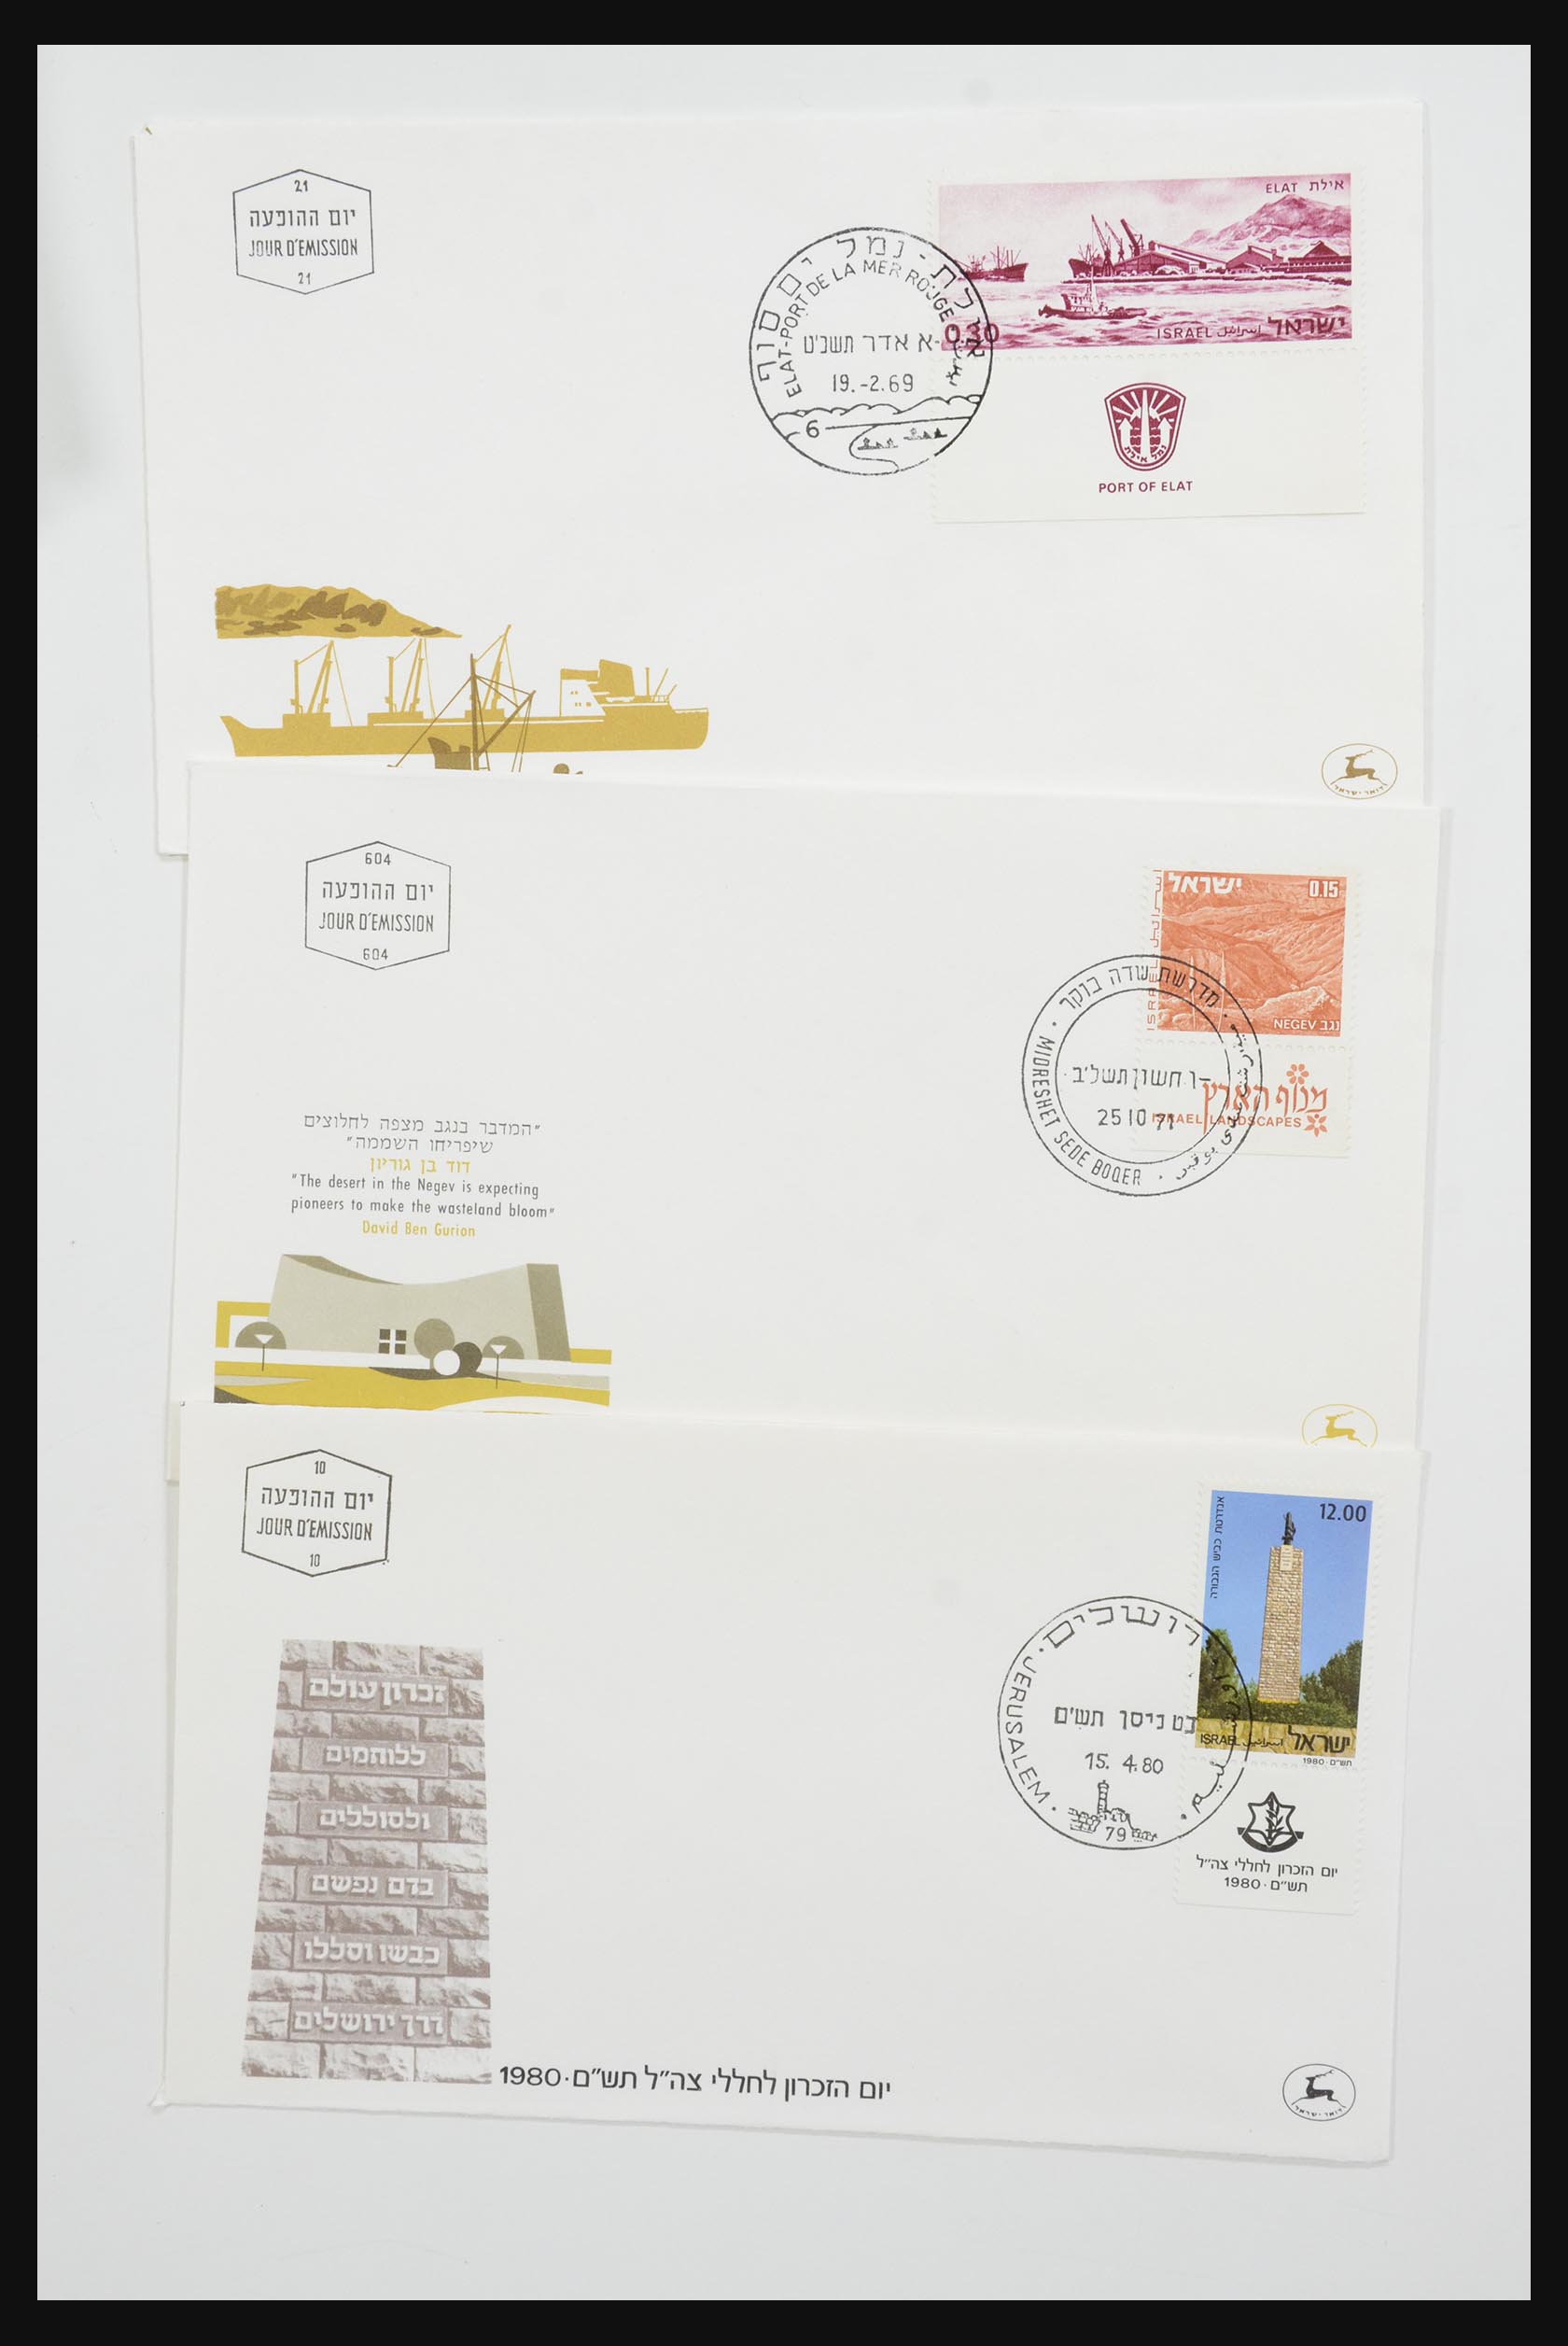 31924 562 - 31924 Israel first day cover collection 1957-2003.